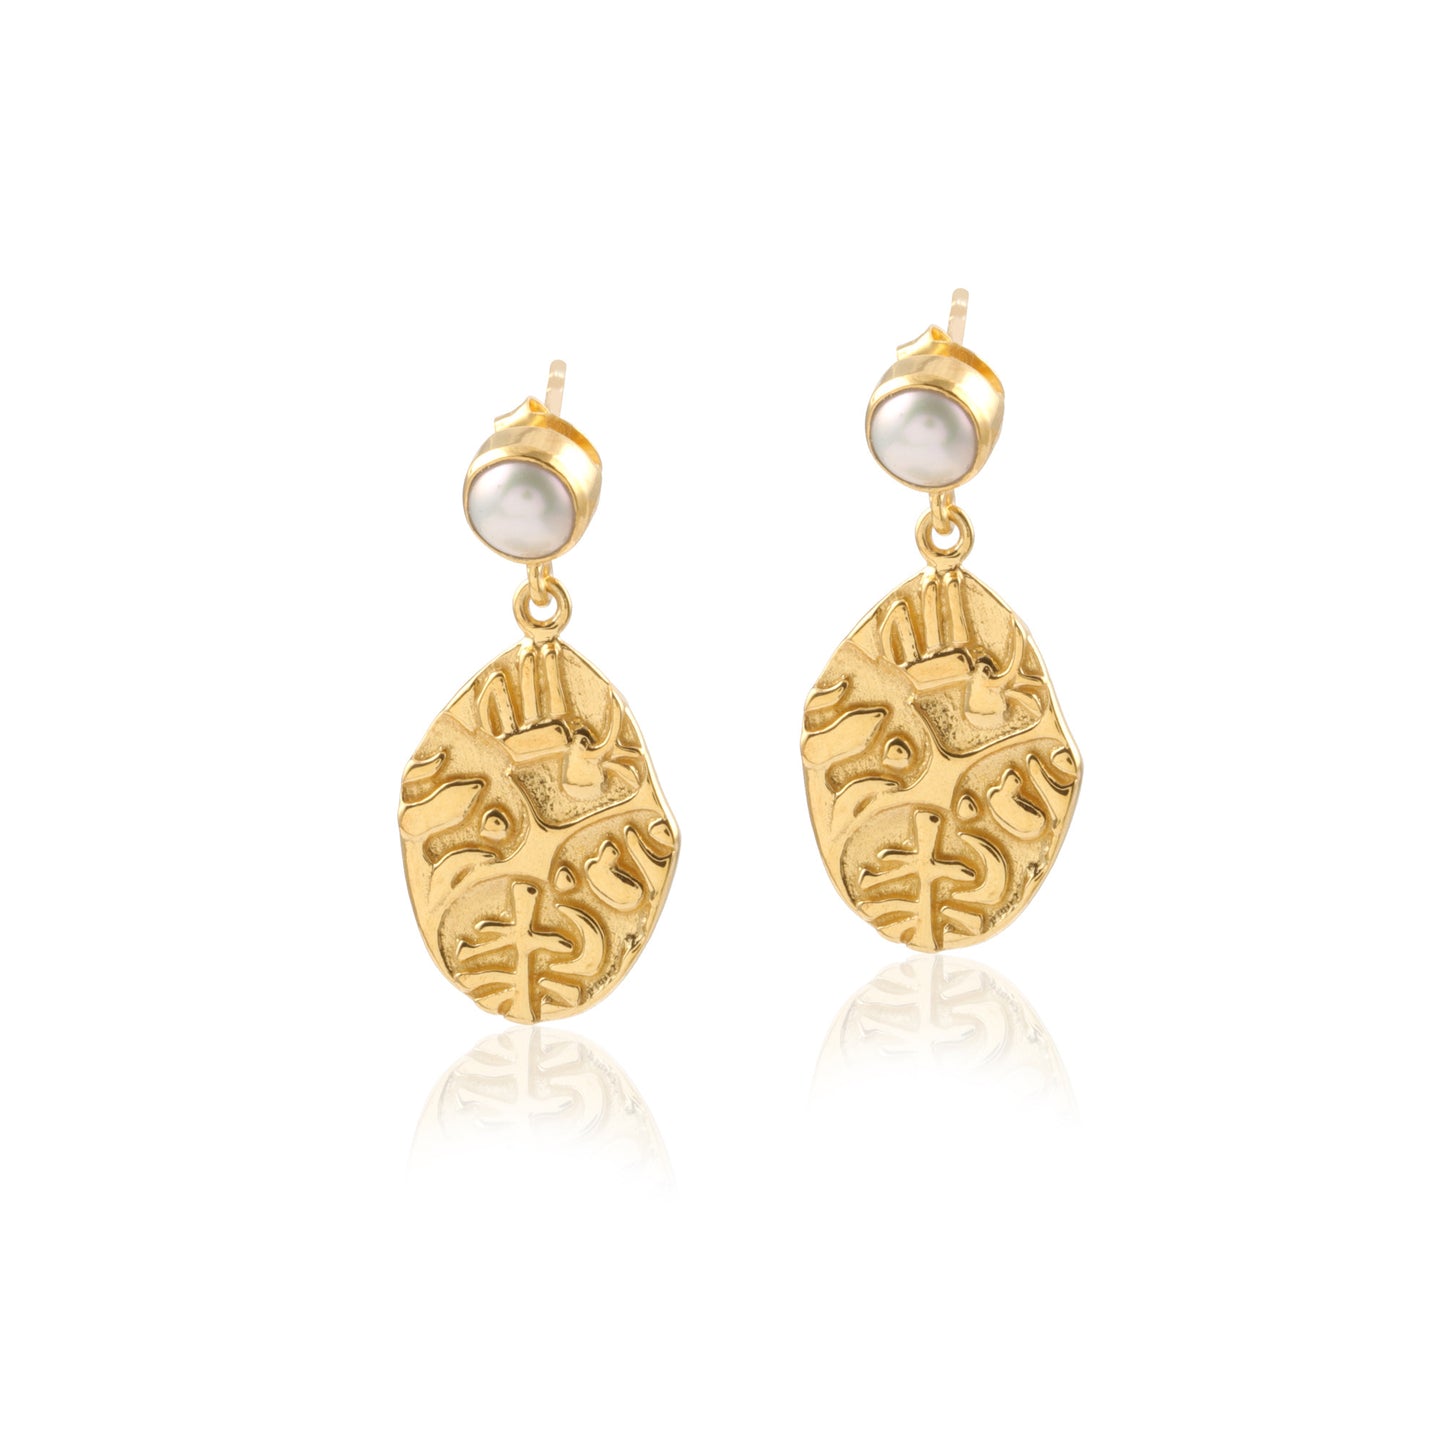 Ancient Coin & Pearl Earrings